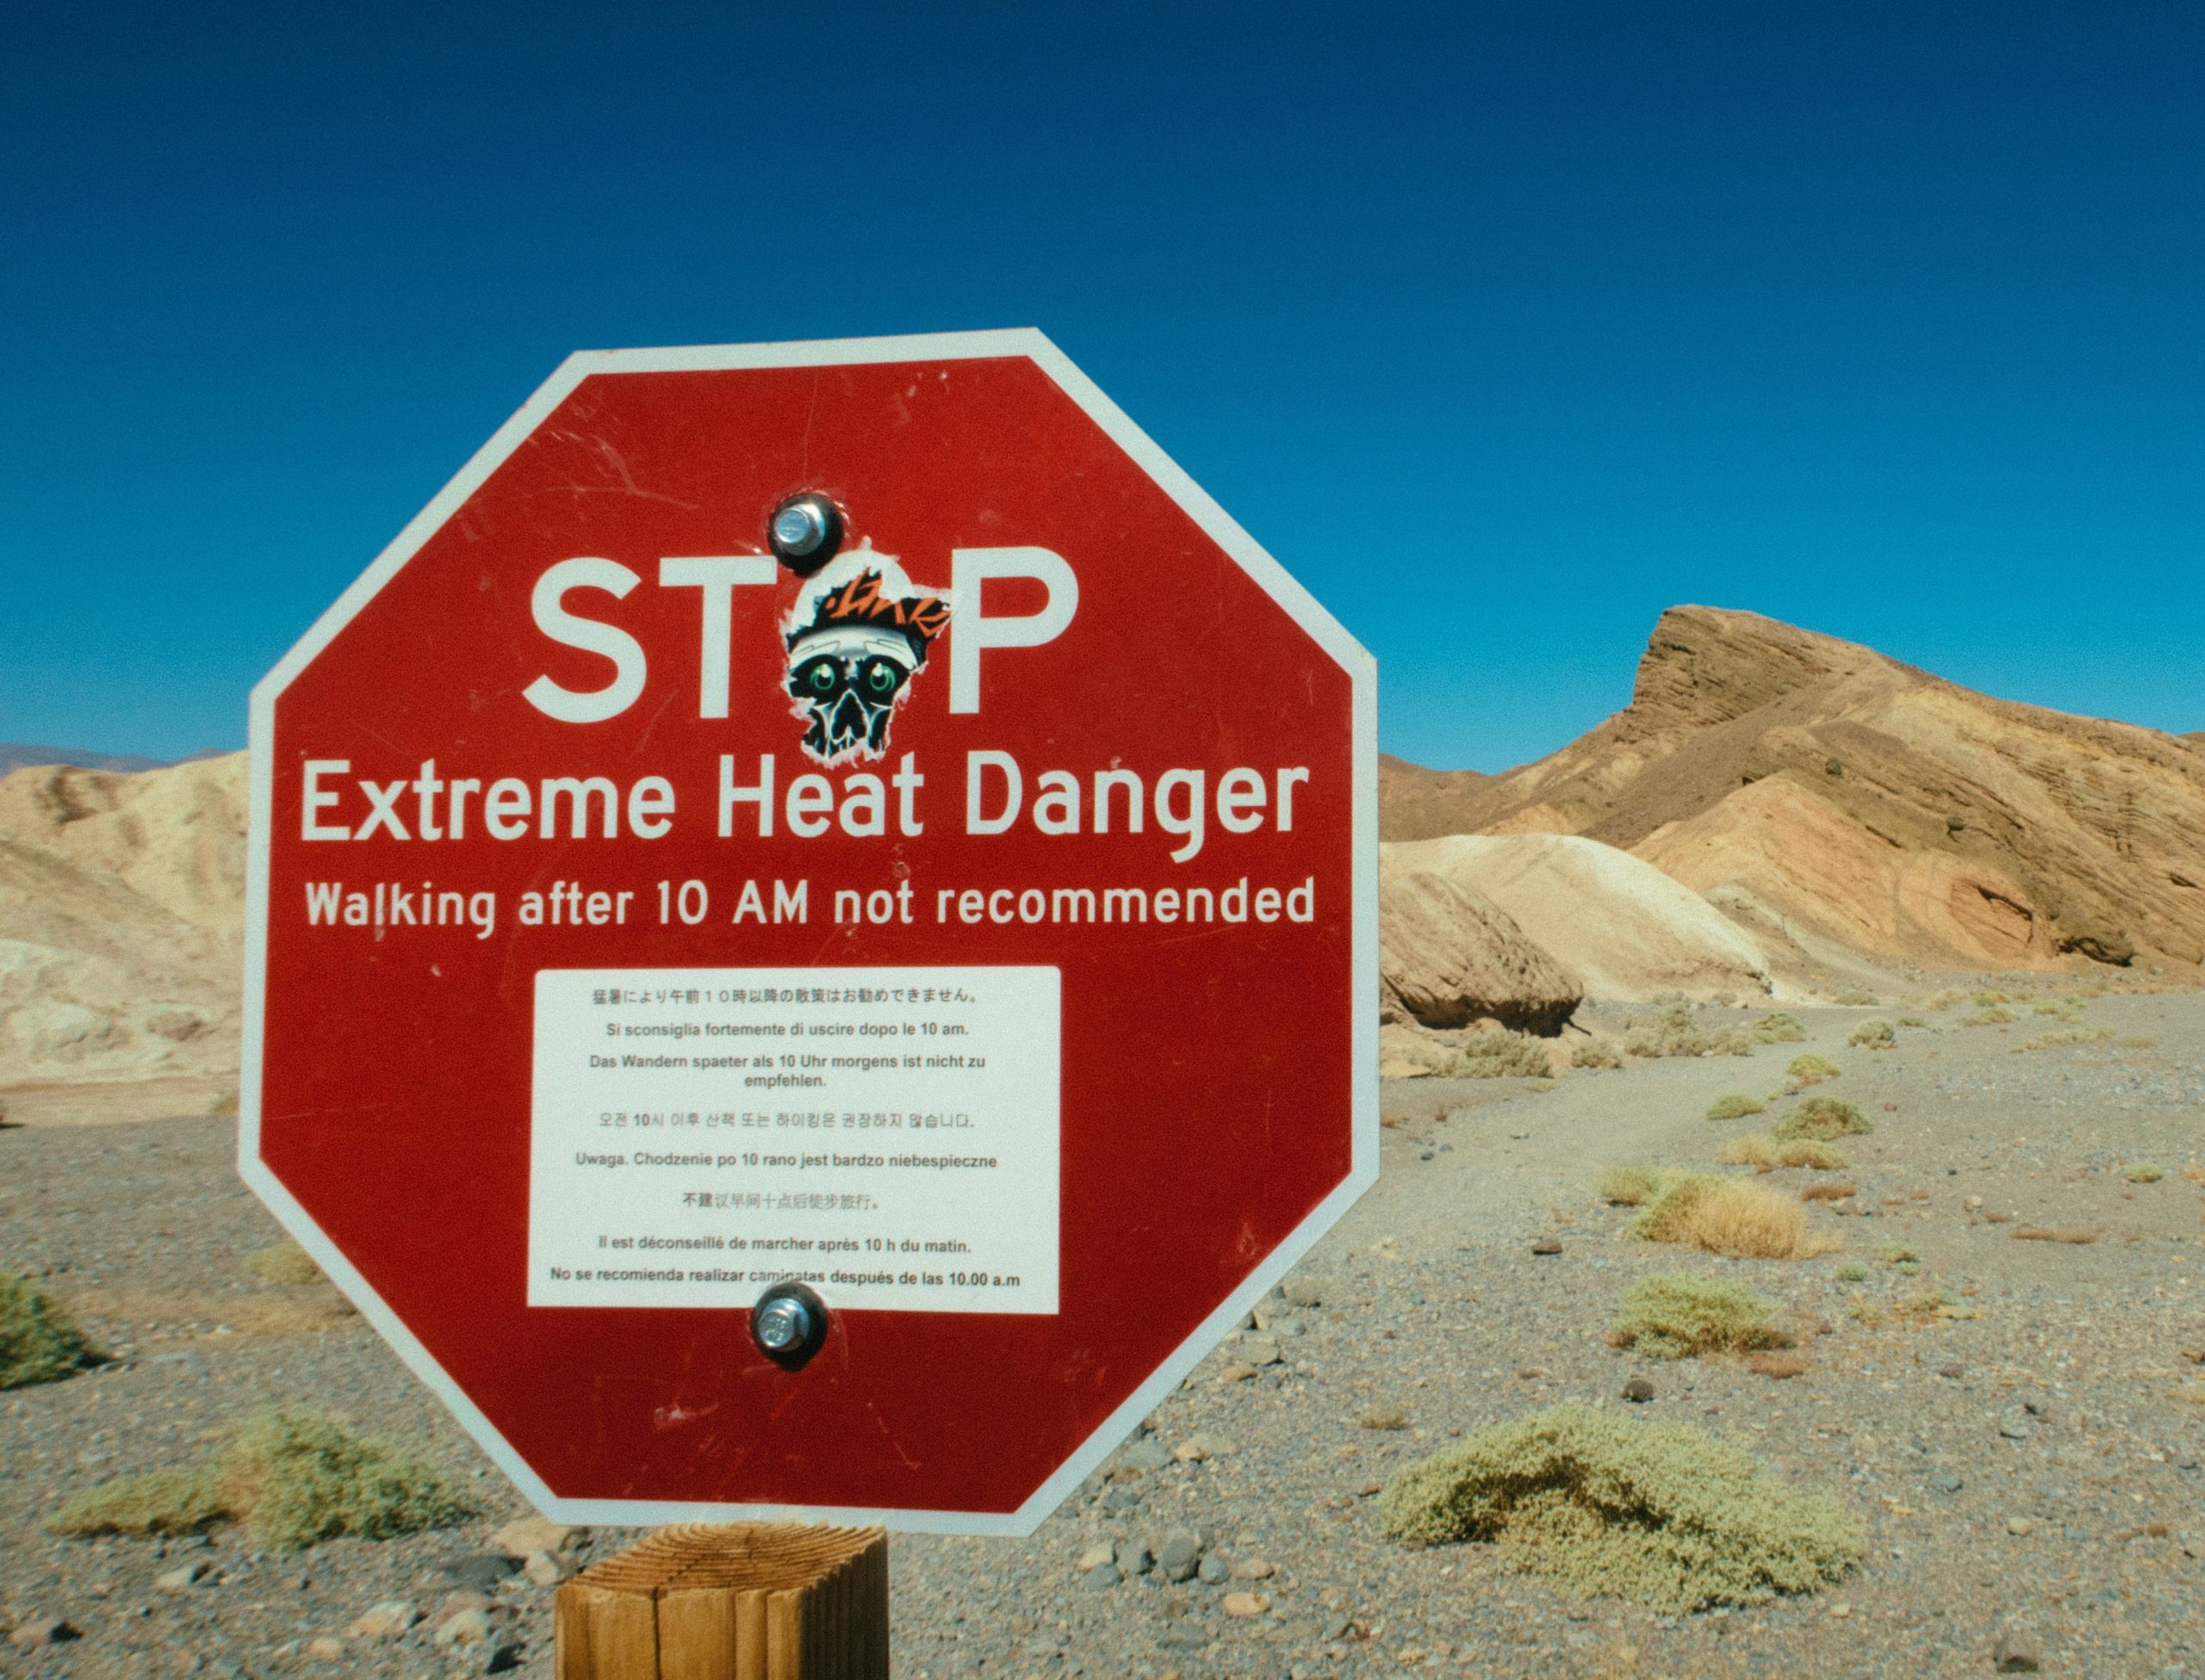 Heat waves and extreme heat is a significant health threat.